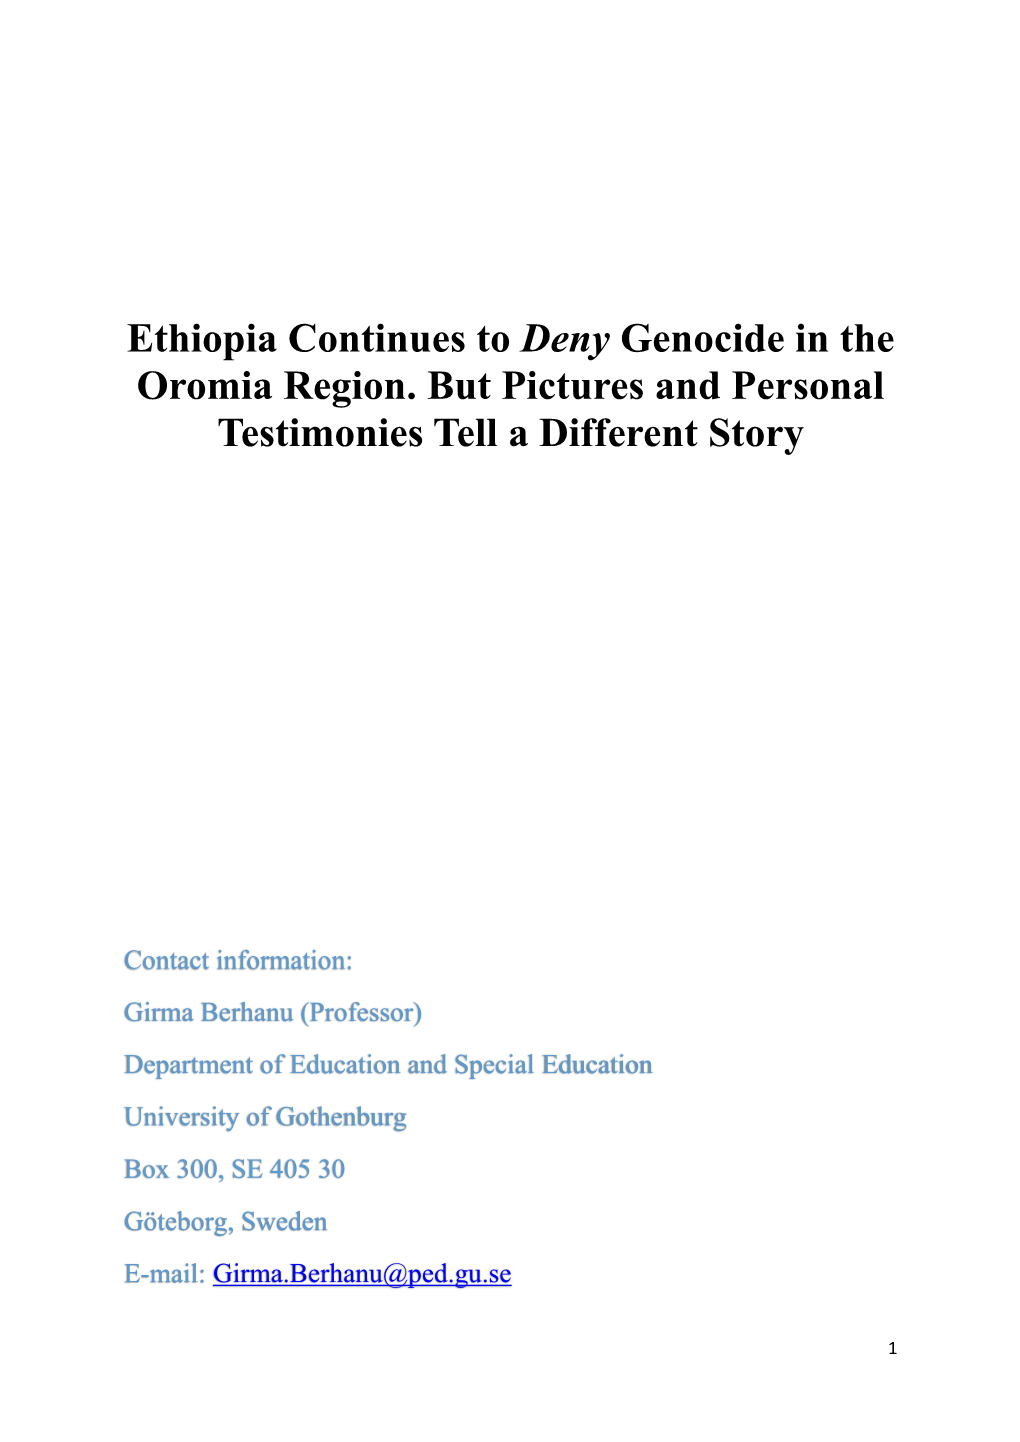 Ethiopia Continues to Deny Genocide in the Oromia Region. but Pictures and Personal Testimonies Tell a Different Story